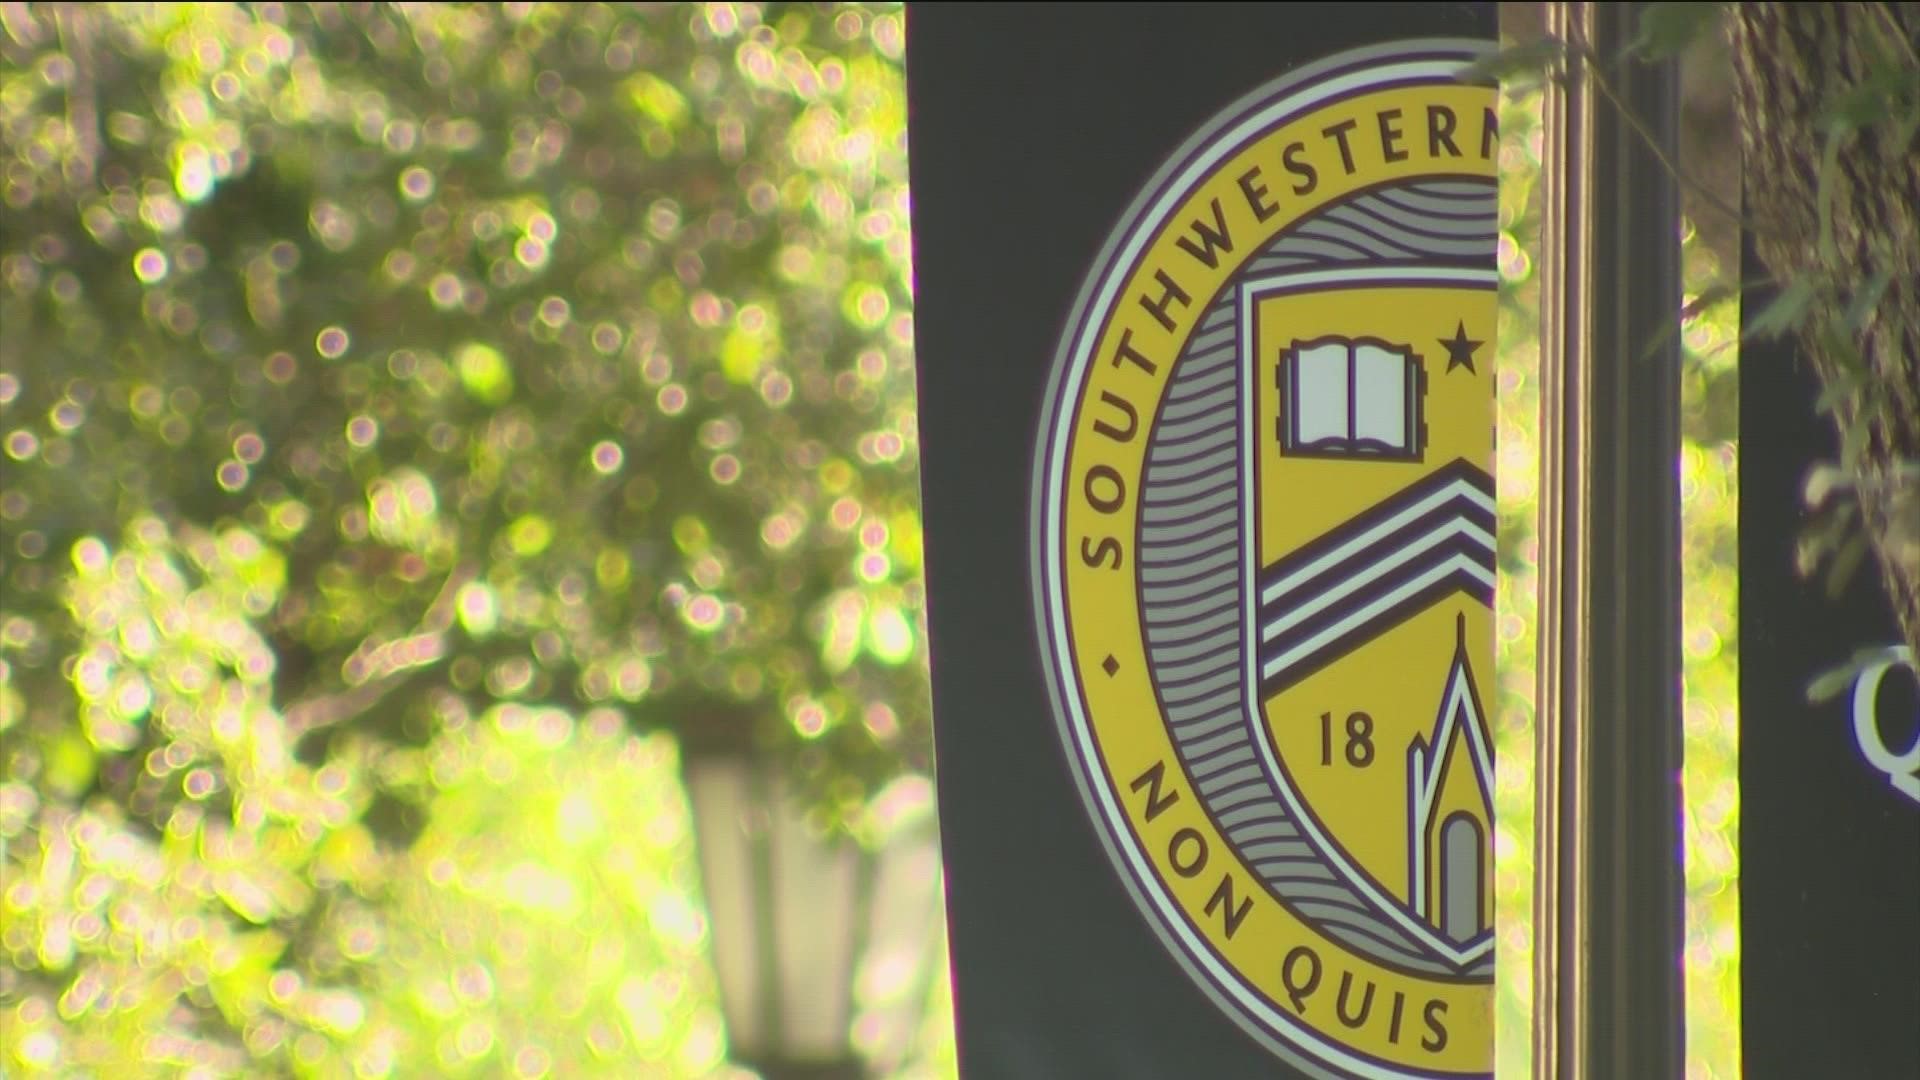 Southwestern University has a vast and rich history in Texas. KVUE's Yvonne Nava explains what makes the school so special.